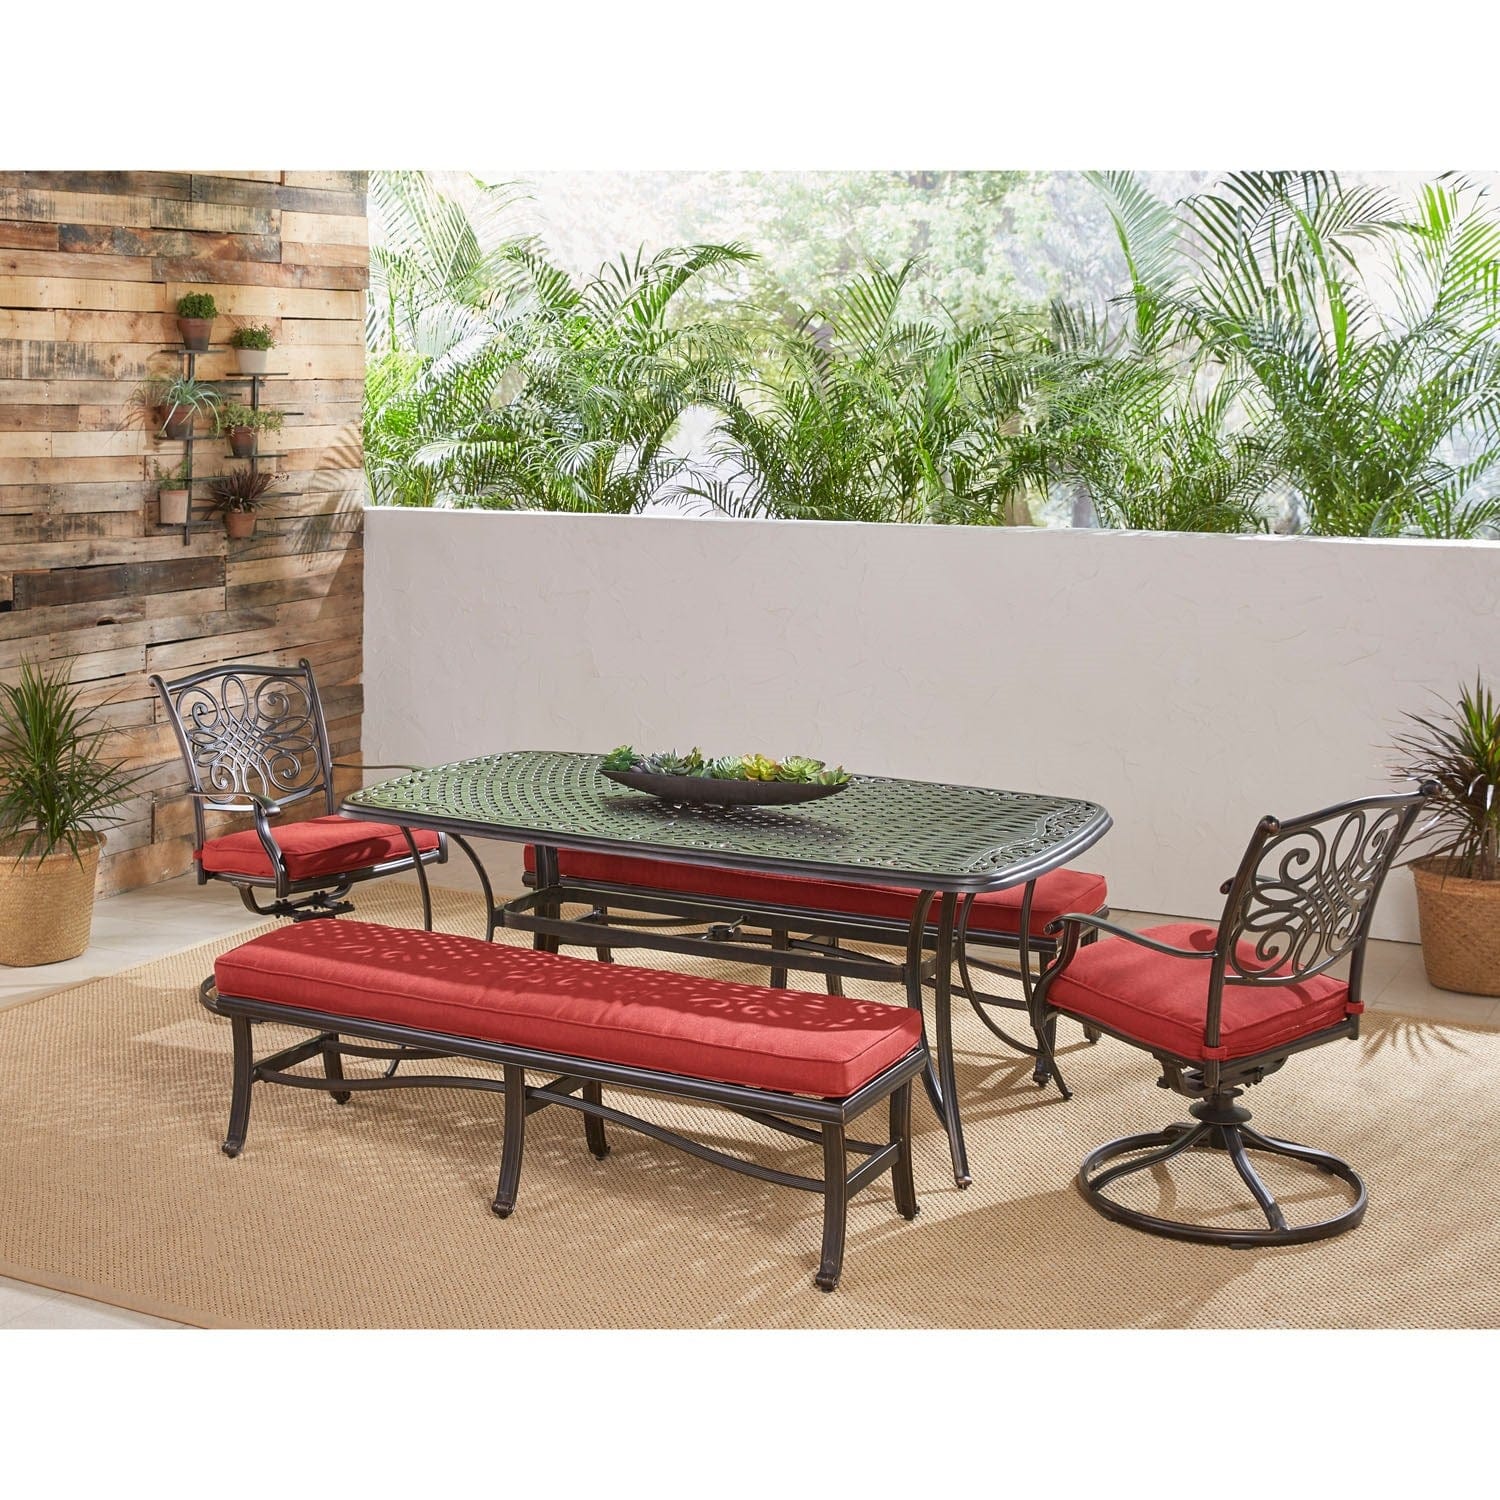 Hanover Outdoor Dining Set Hanover - Traditions 5-Piece Aluminium Frame Patio Dining Set in Red with 2 Swivel Rockers, 2 Cushioned Benches, and a 38" x 72" Cast-Top Dining Table | TRADDN5PCSW2BN-RED